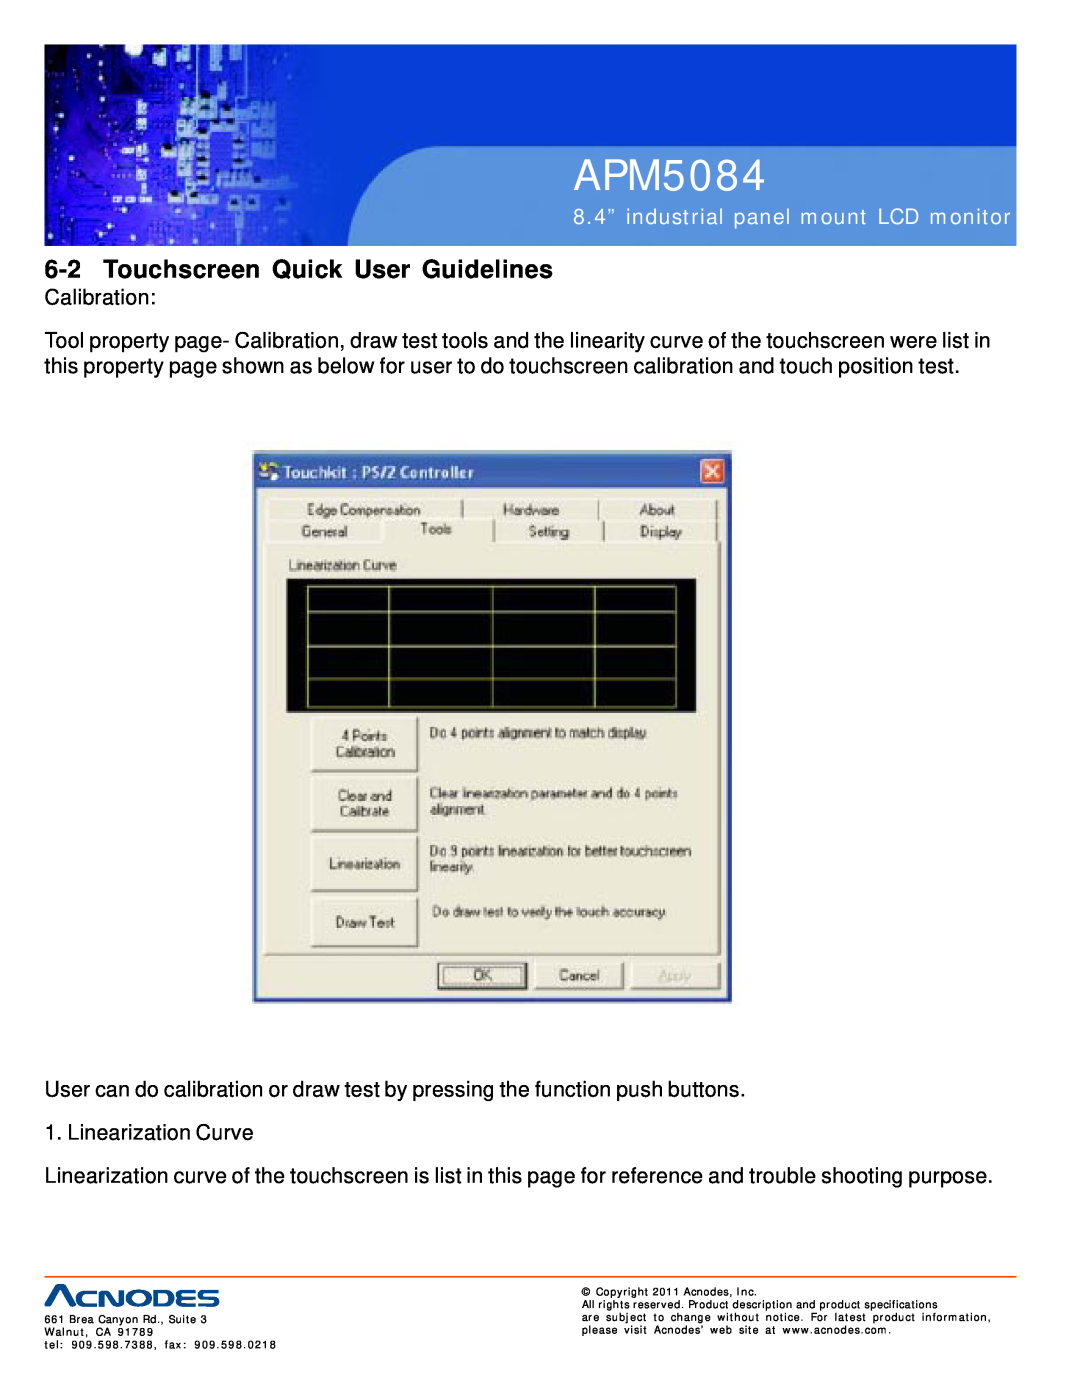 Acnodes APM5084 user manual Touchscreen Quick User Guidelines, 8.4” industrial panel mount LCD monitor 